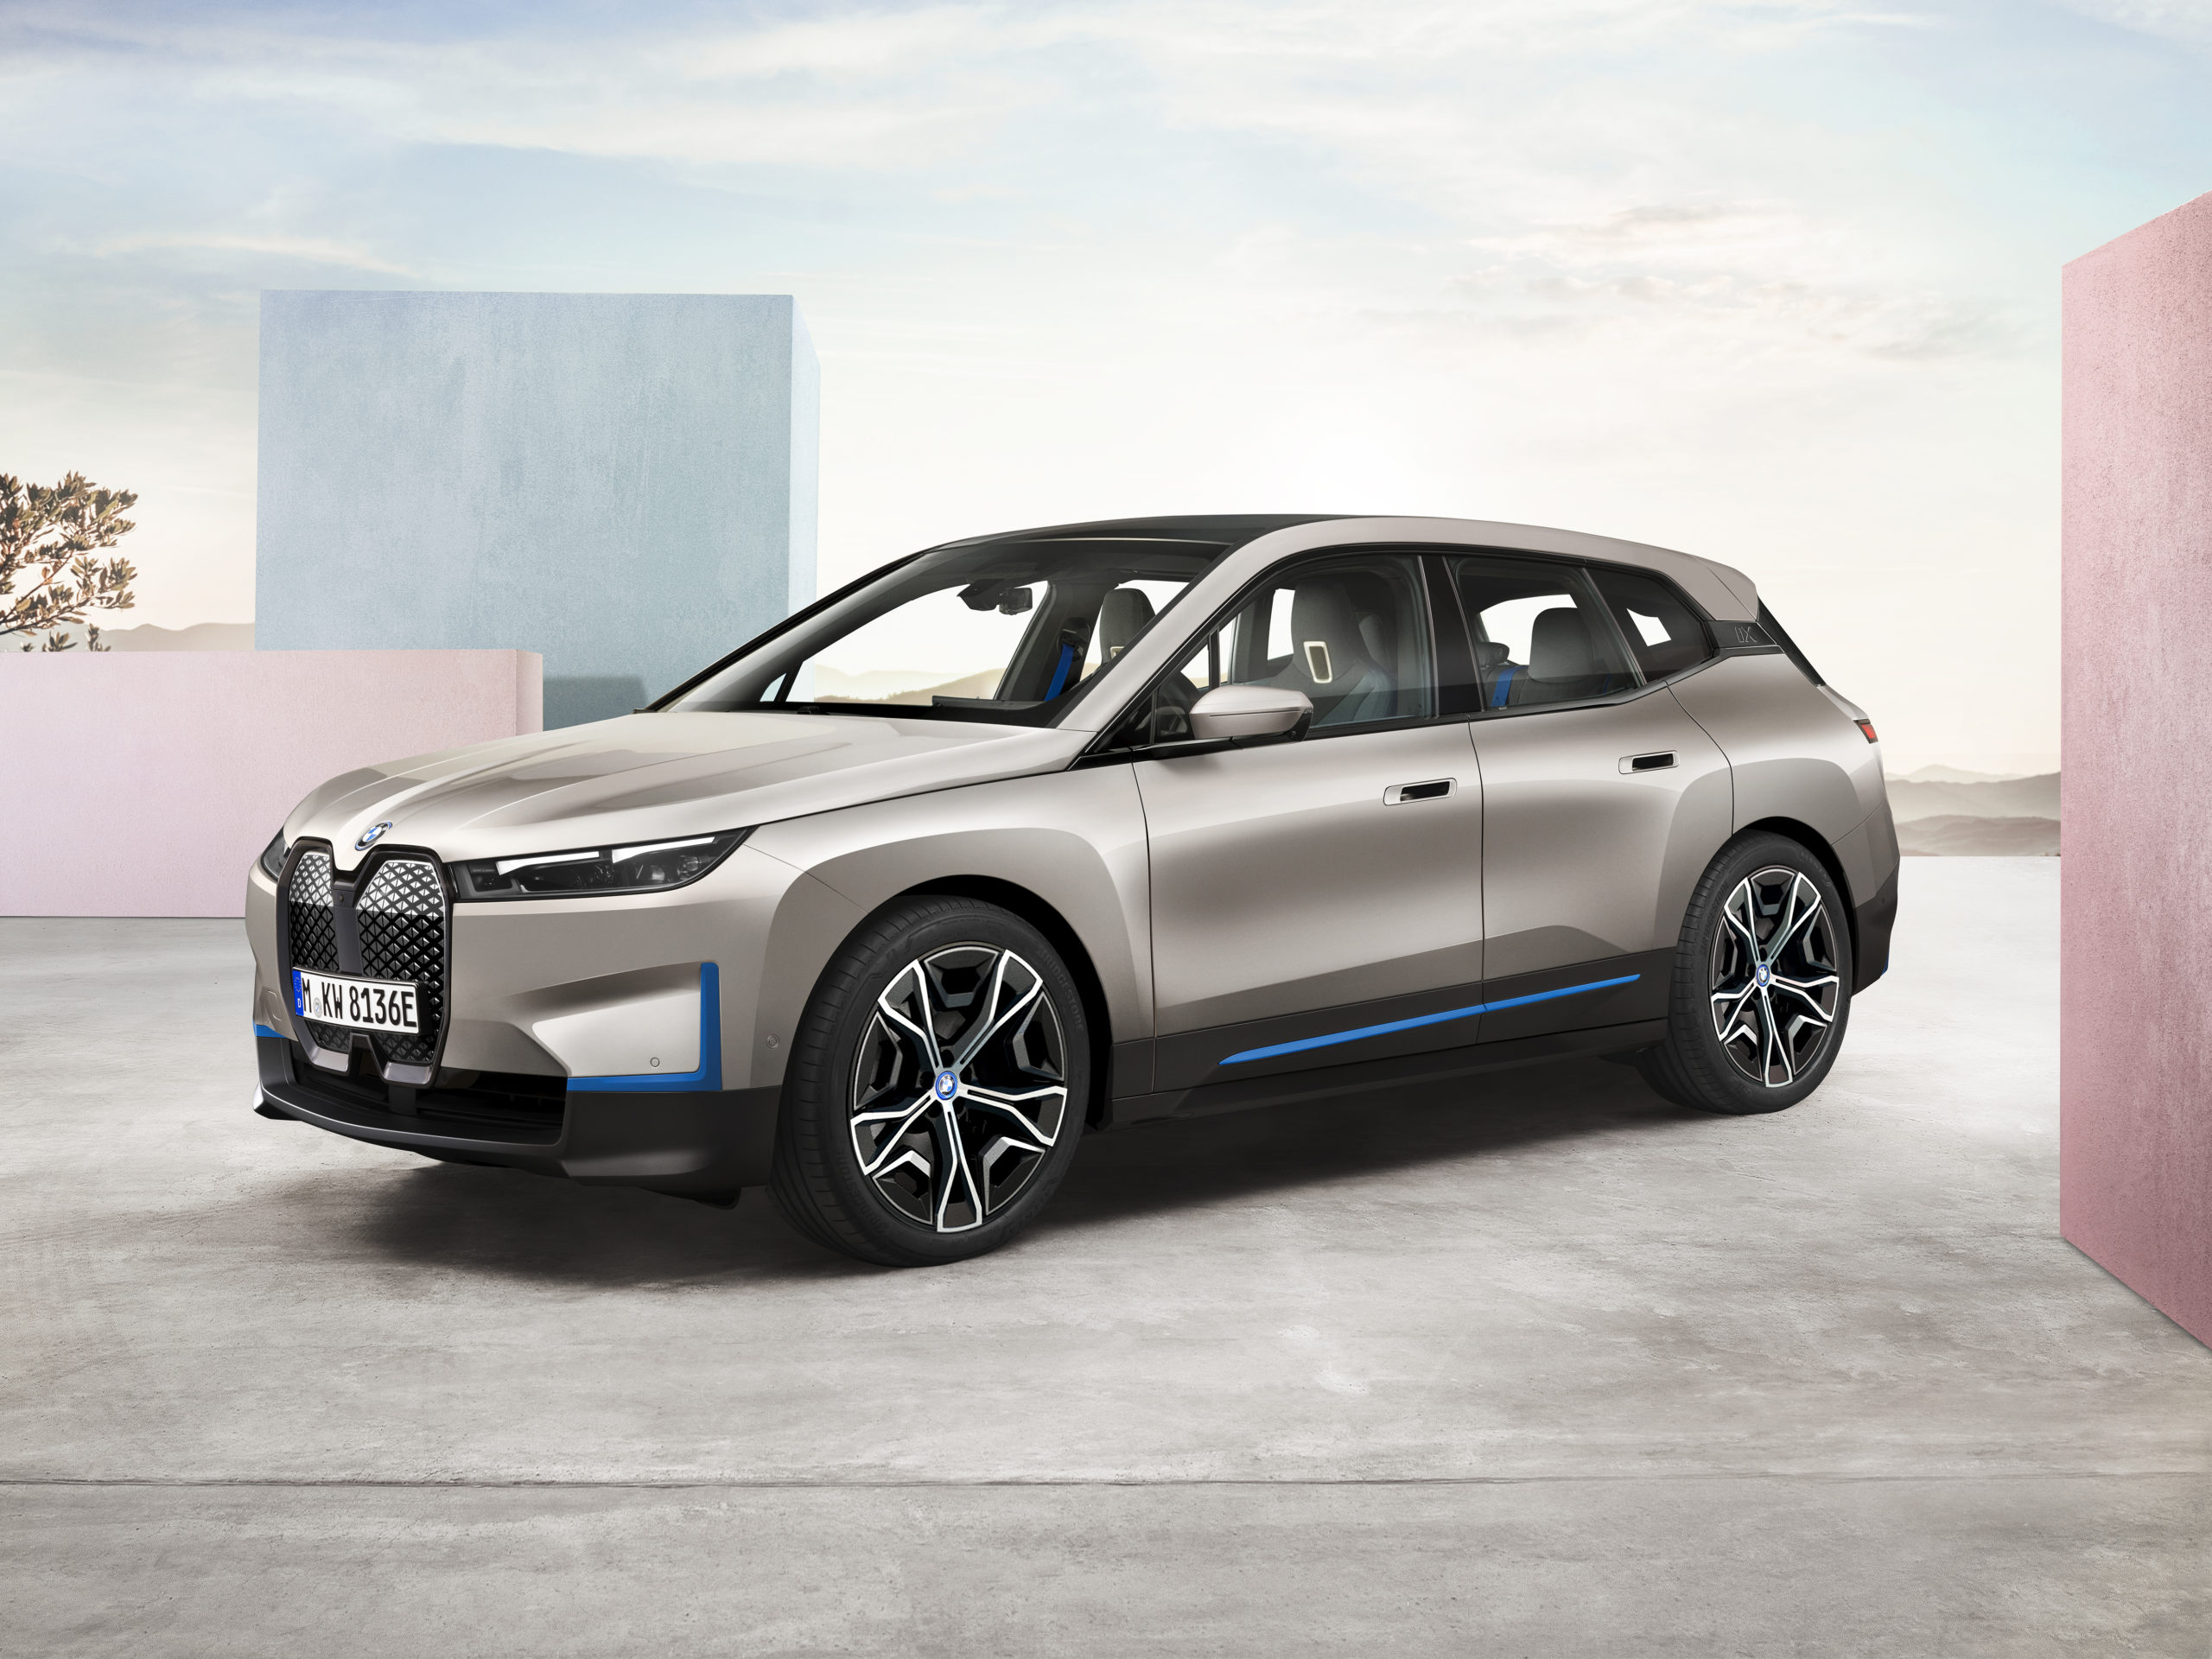 BMW Launches Bizarre Marketing Campaign To Defend Its Ugly Car